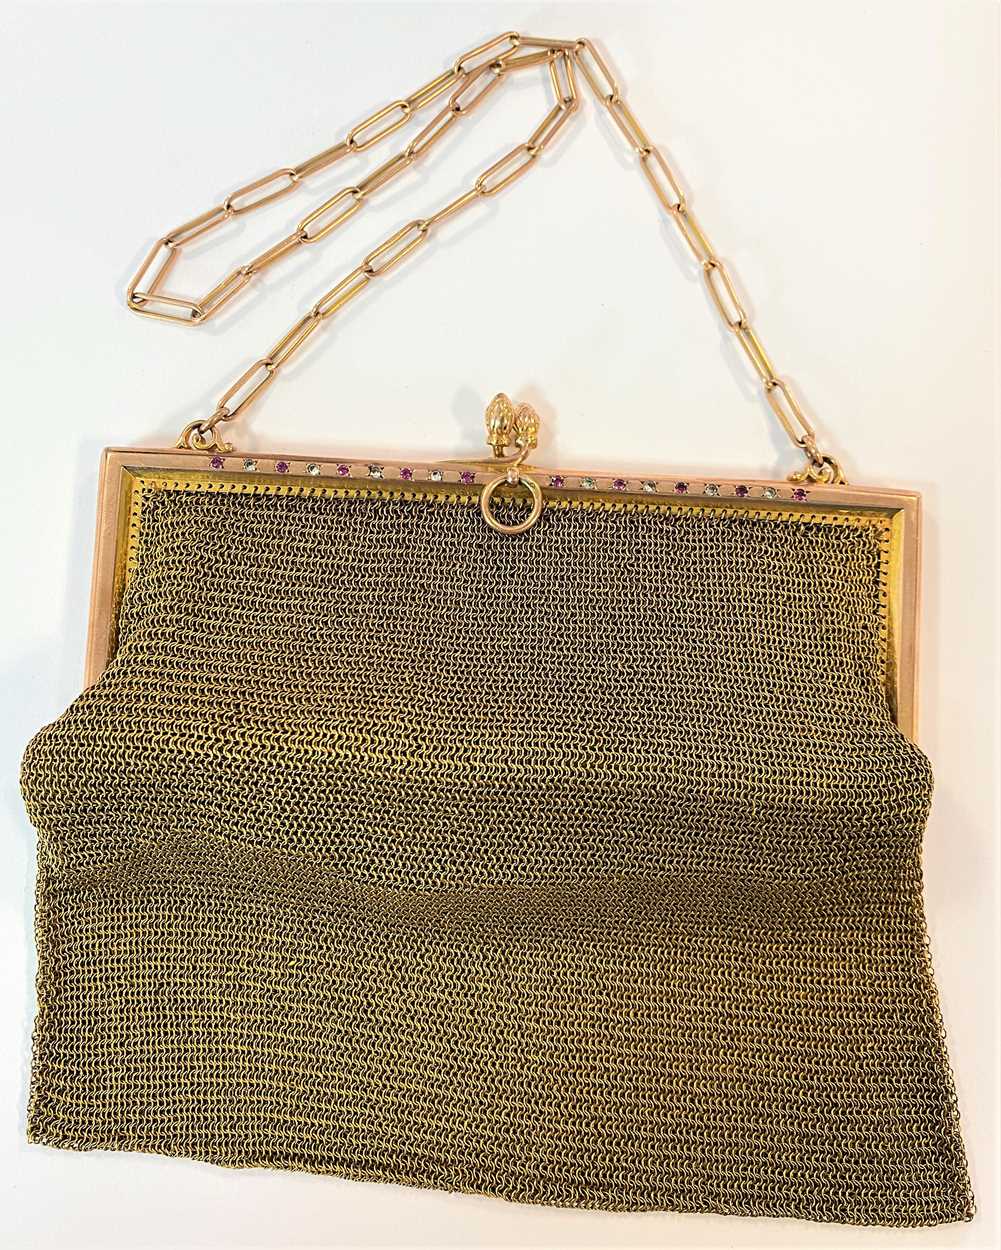 Two early 20th century mesh style dance purses, - Image 9 of 10